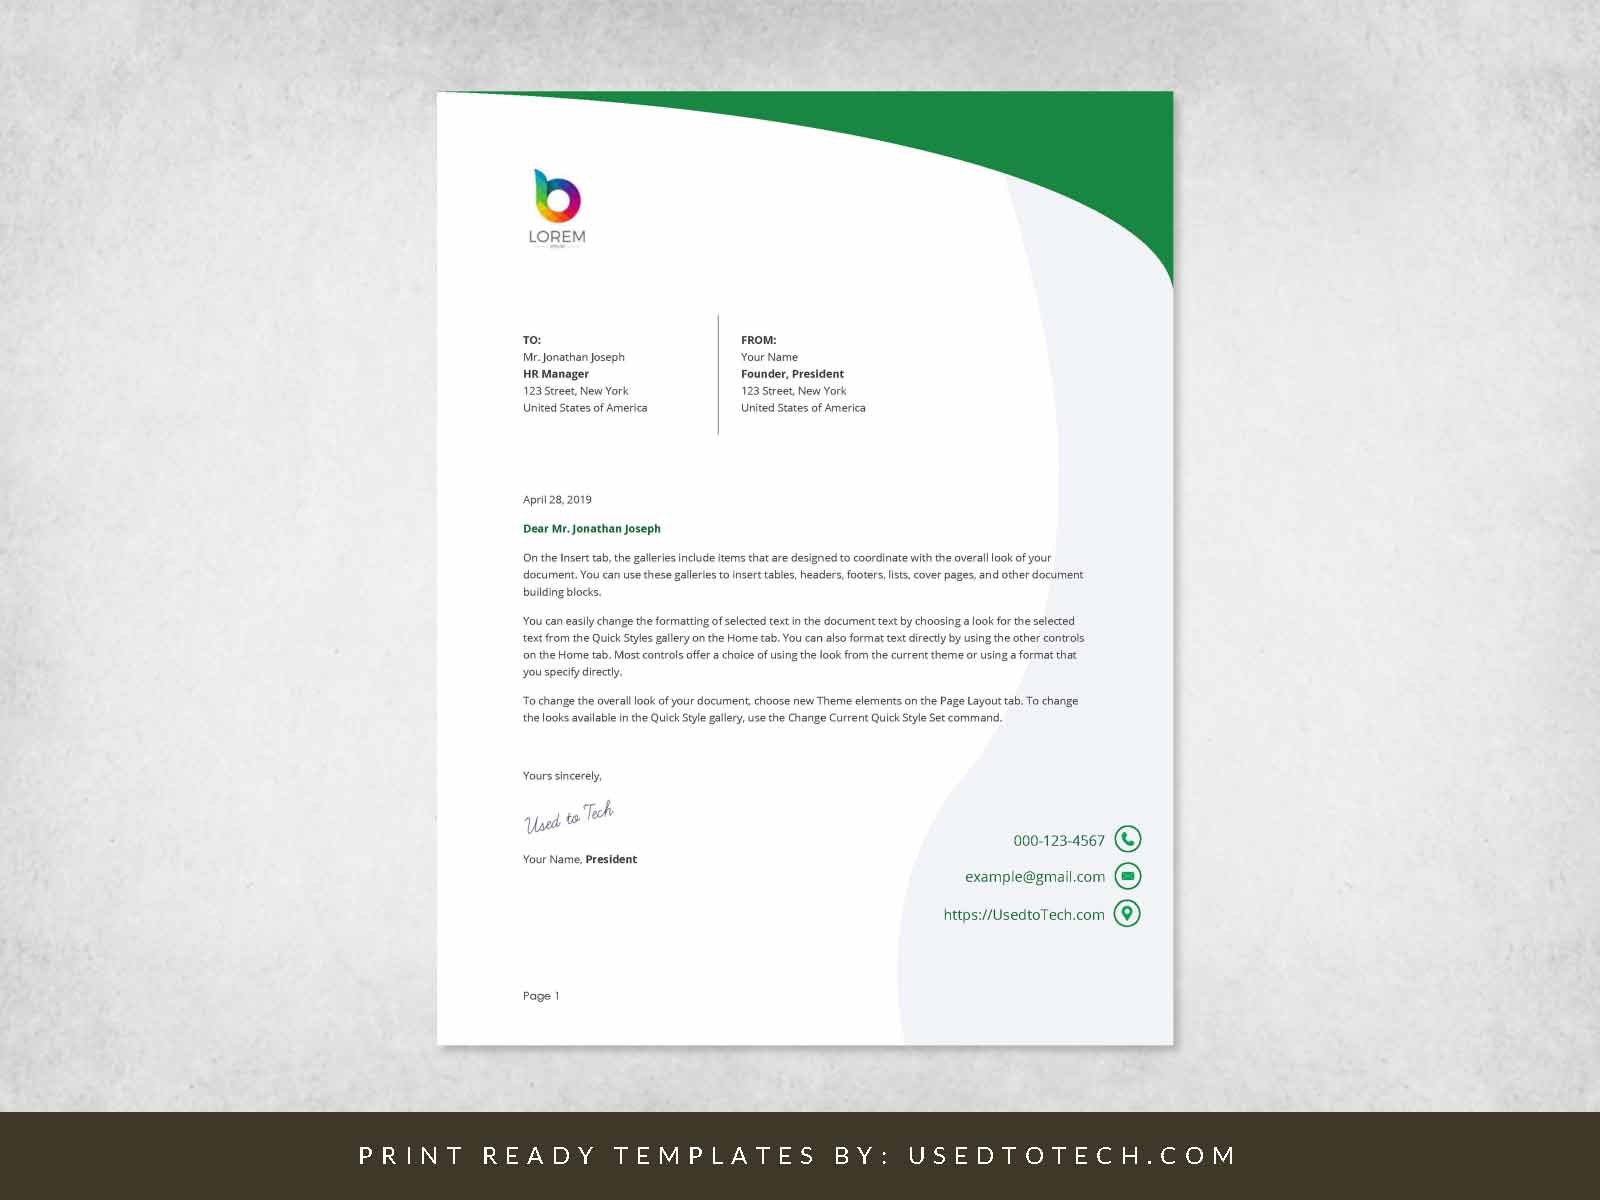 Perfect letterhead design in Word free - Used to Tech With Ms Word Letterhead Template